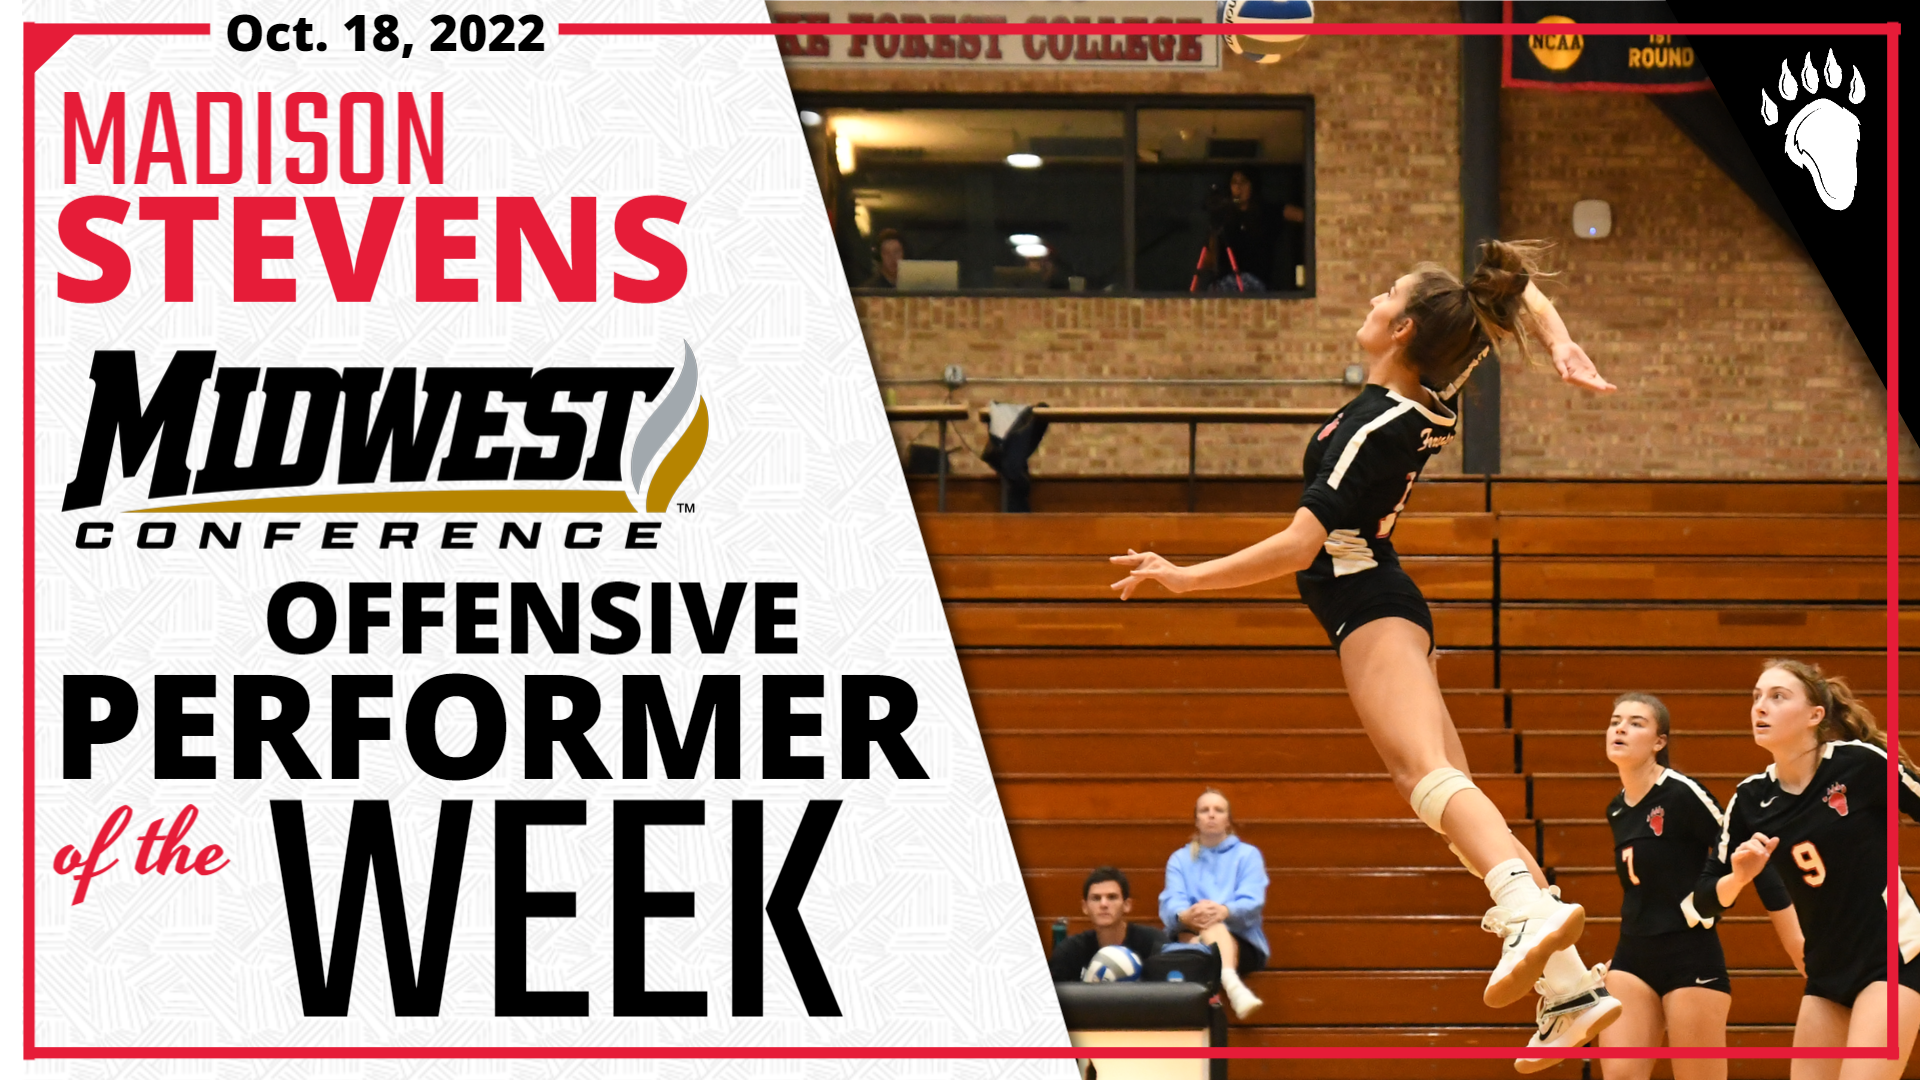 Madison Stevens Named MWC Offensive Performer of the Week